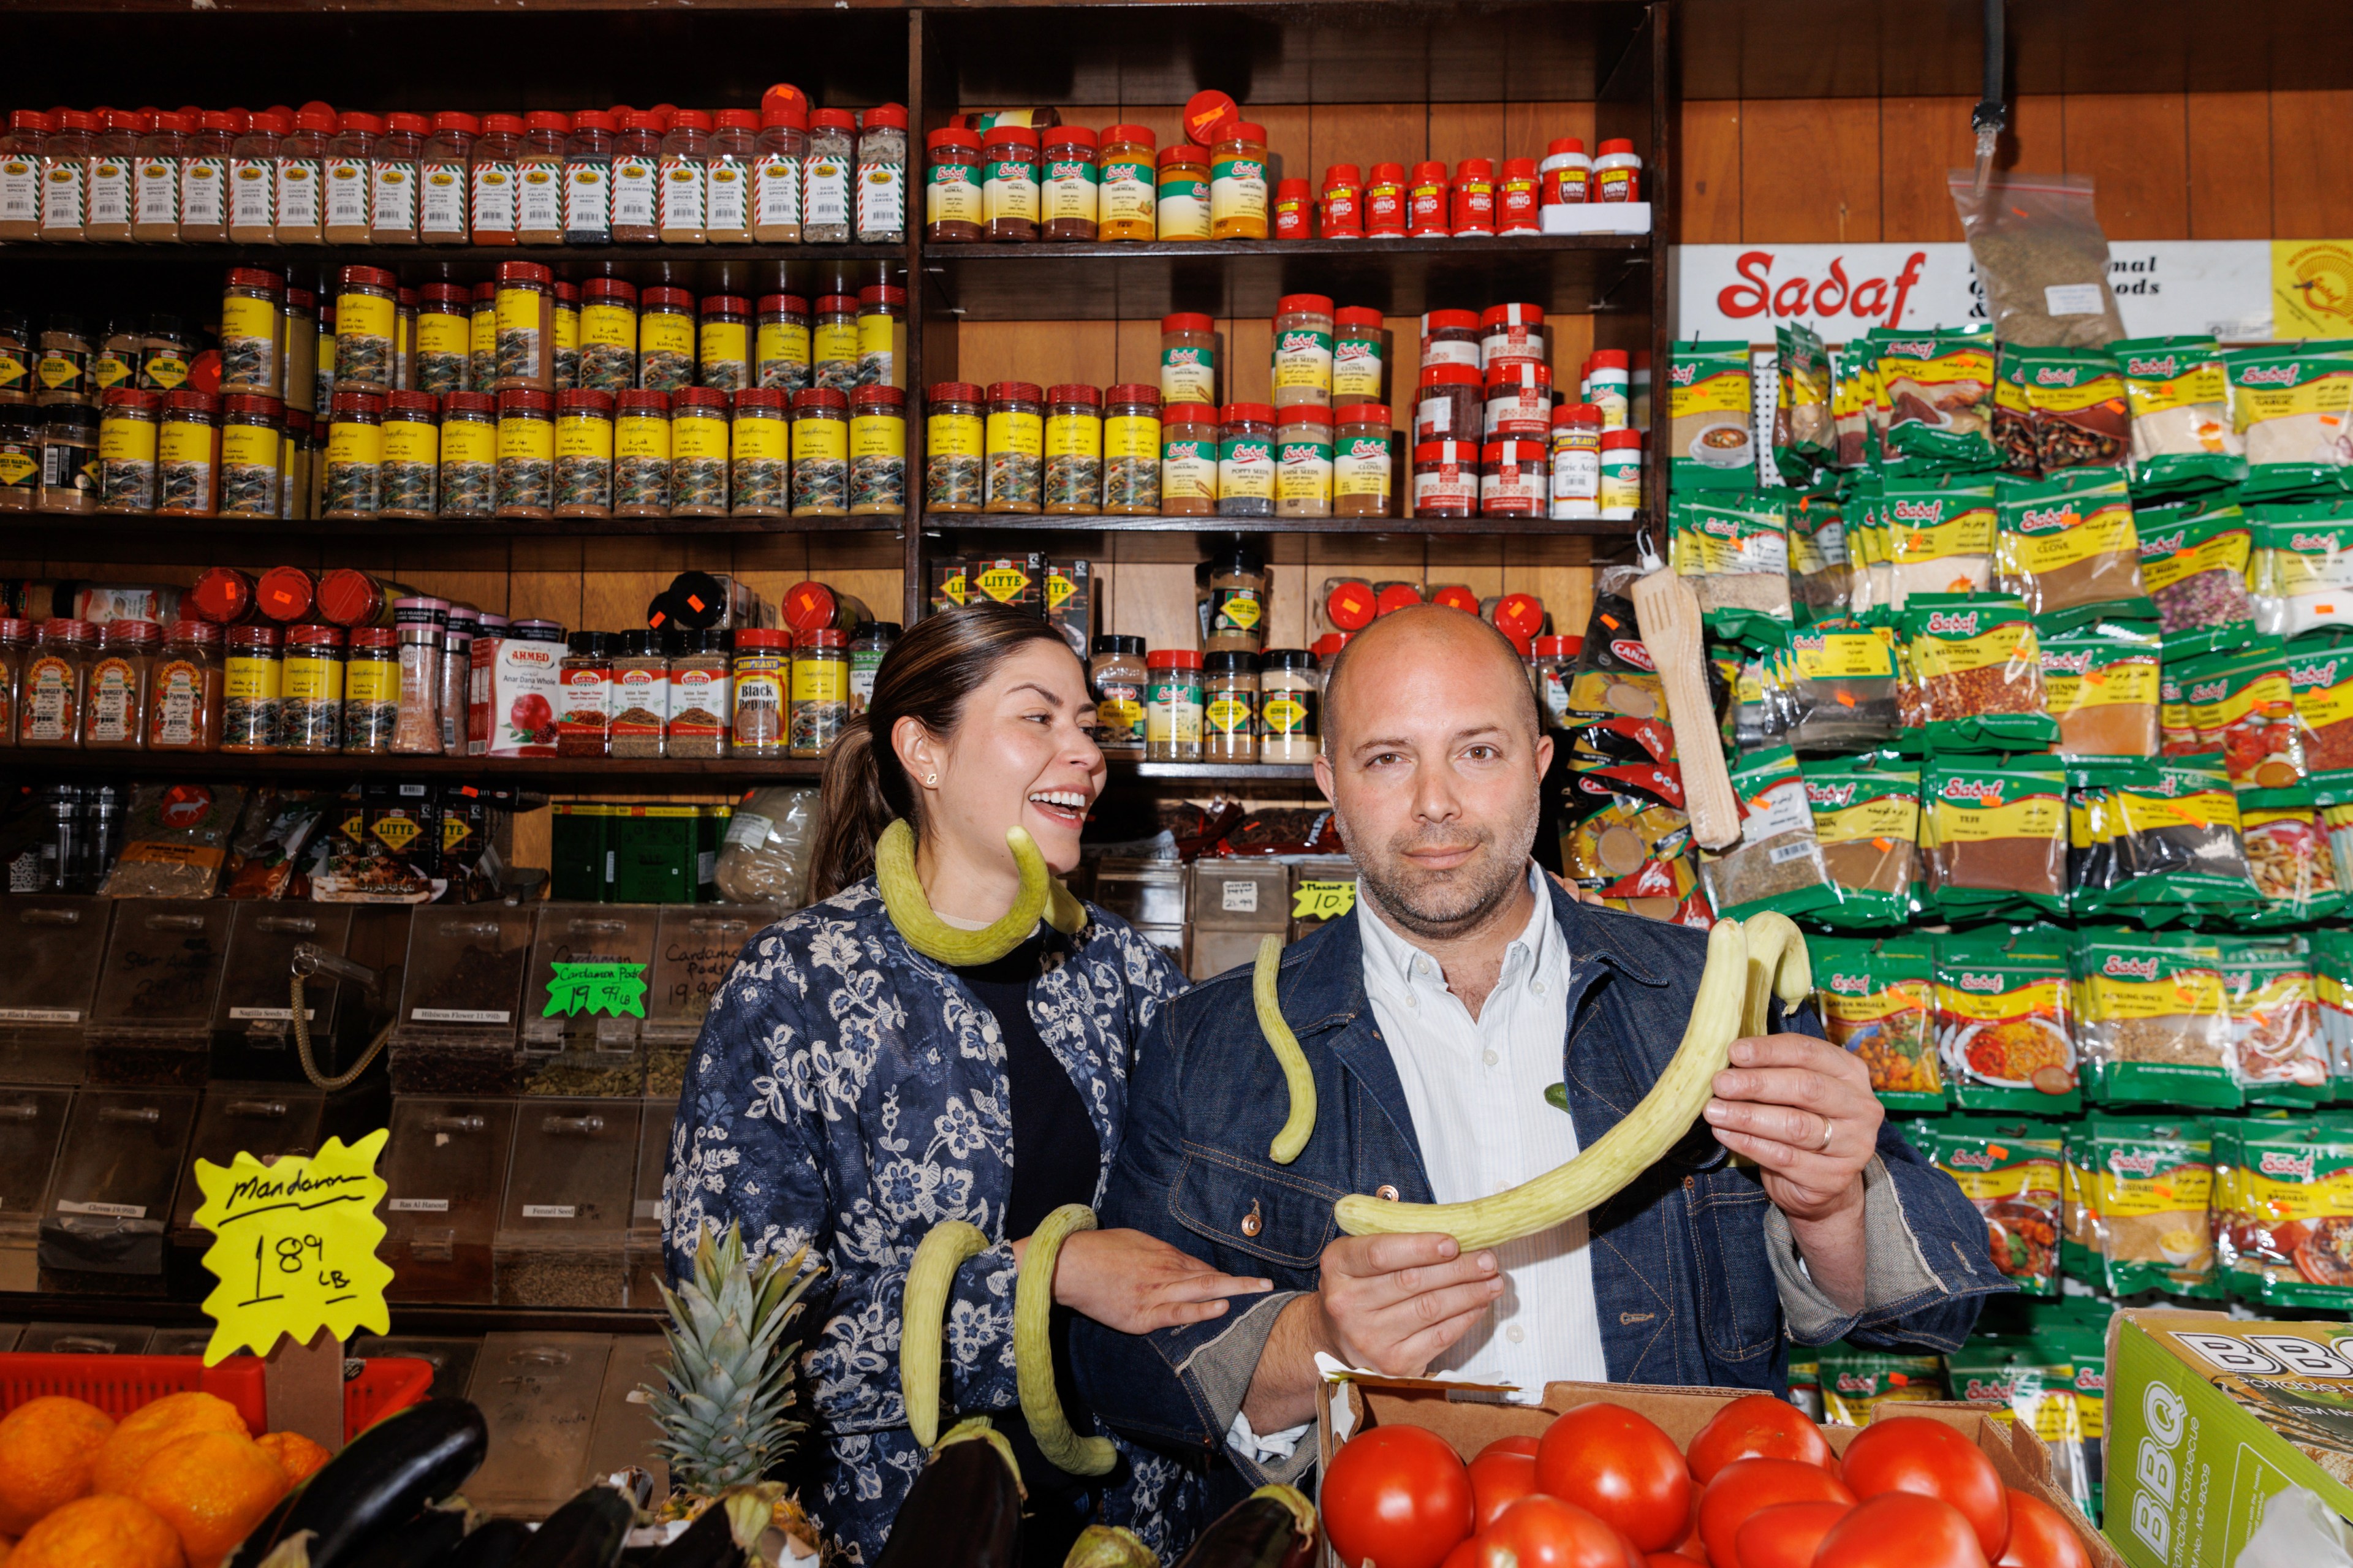 A woman and a bald man stand in a colorful grocery store aisle with spices behind them. The man holds a long vegetable, and both have playful expressions.